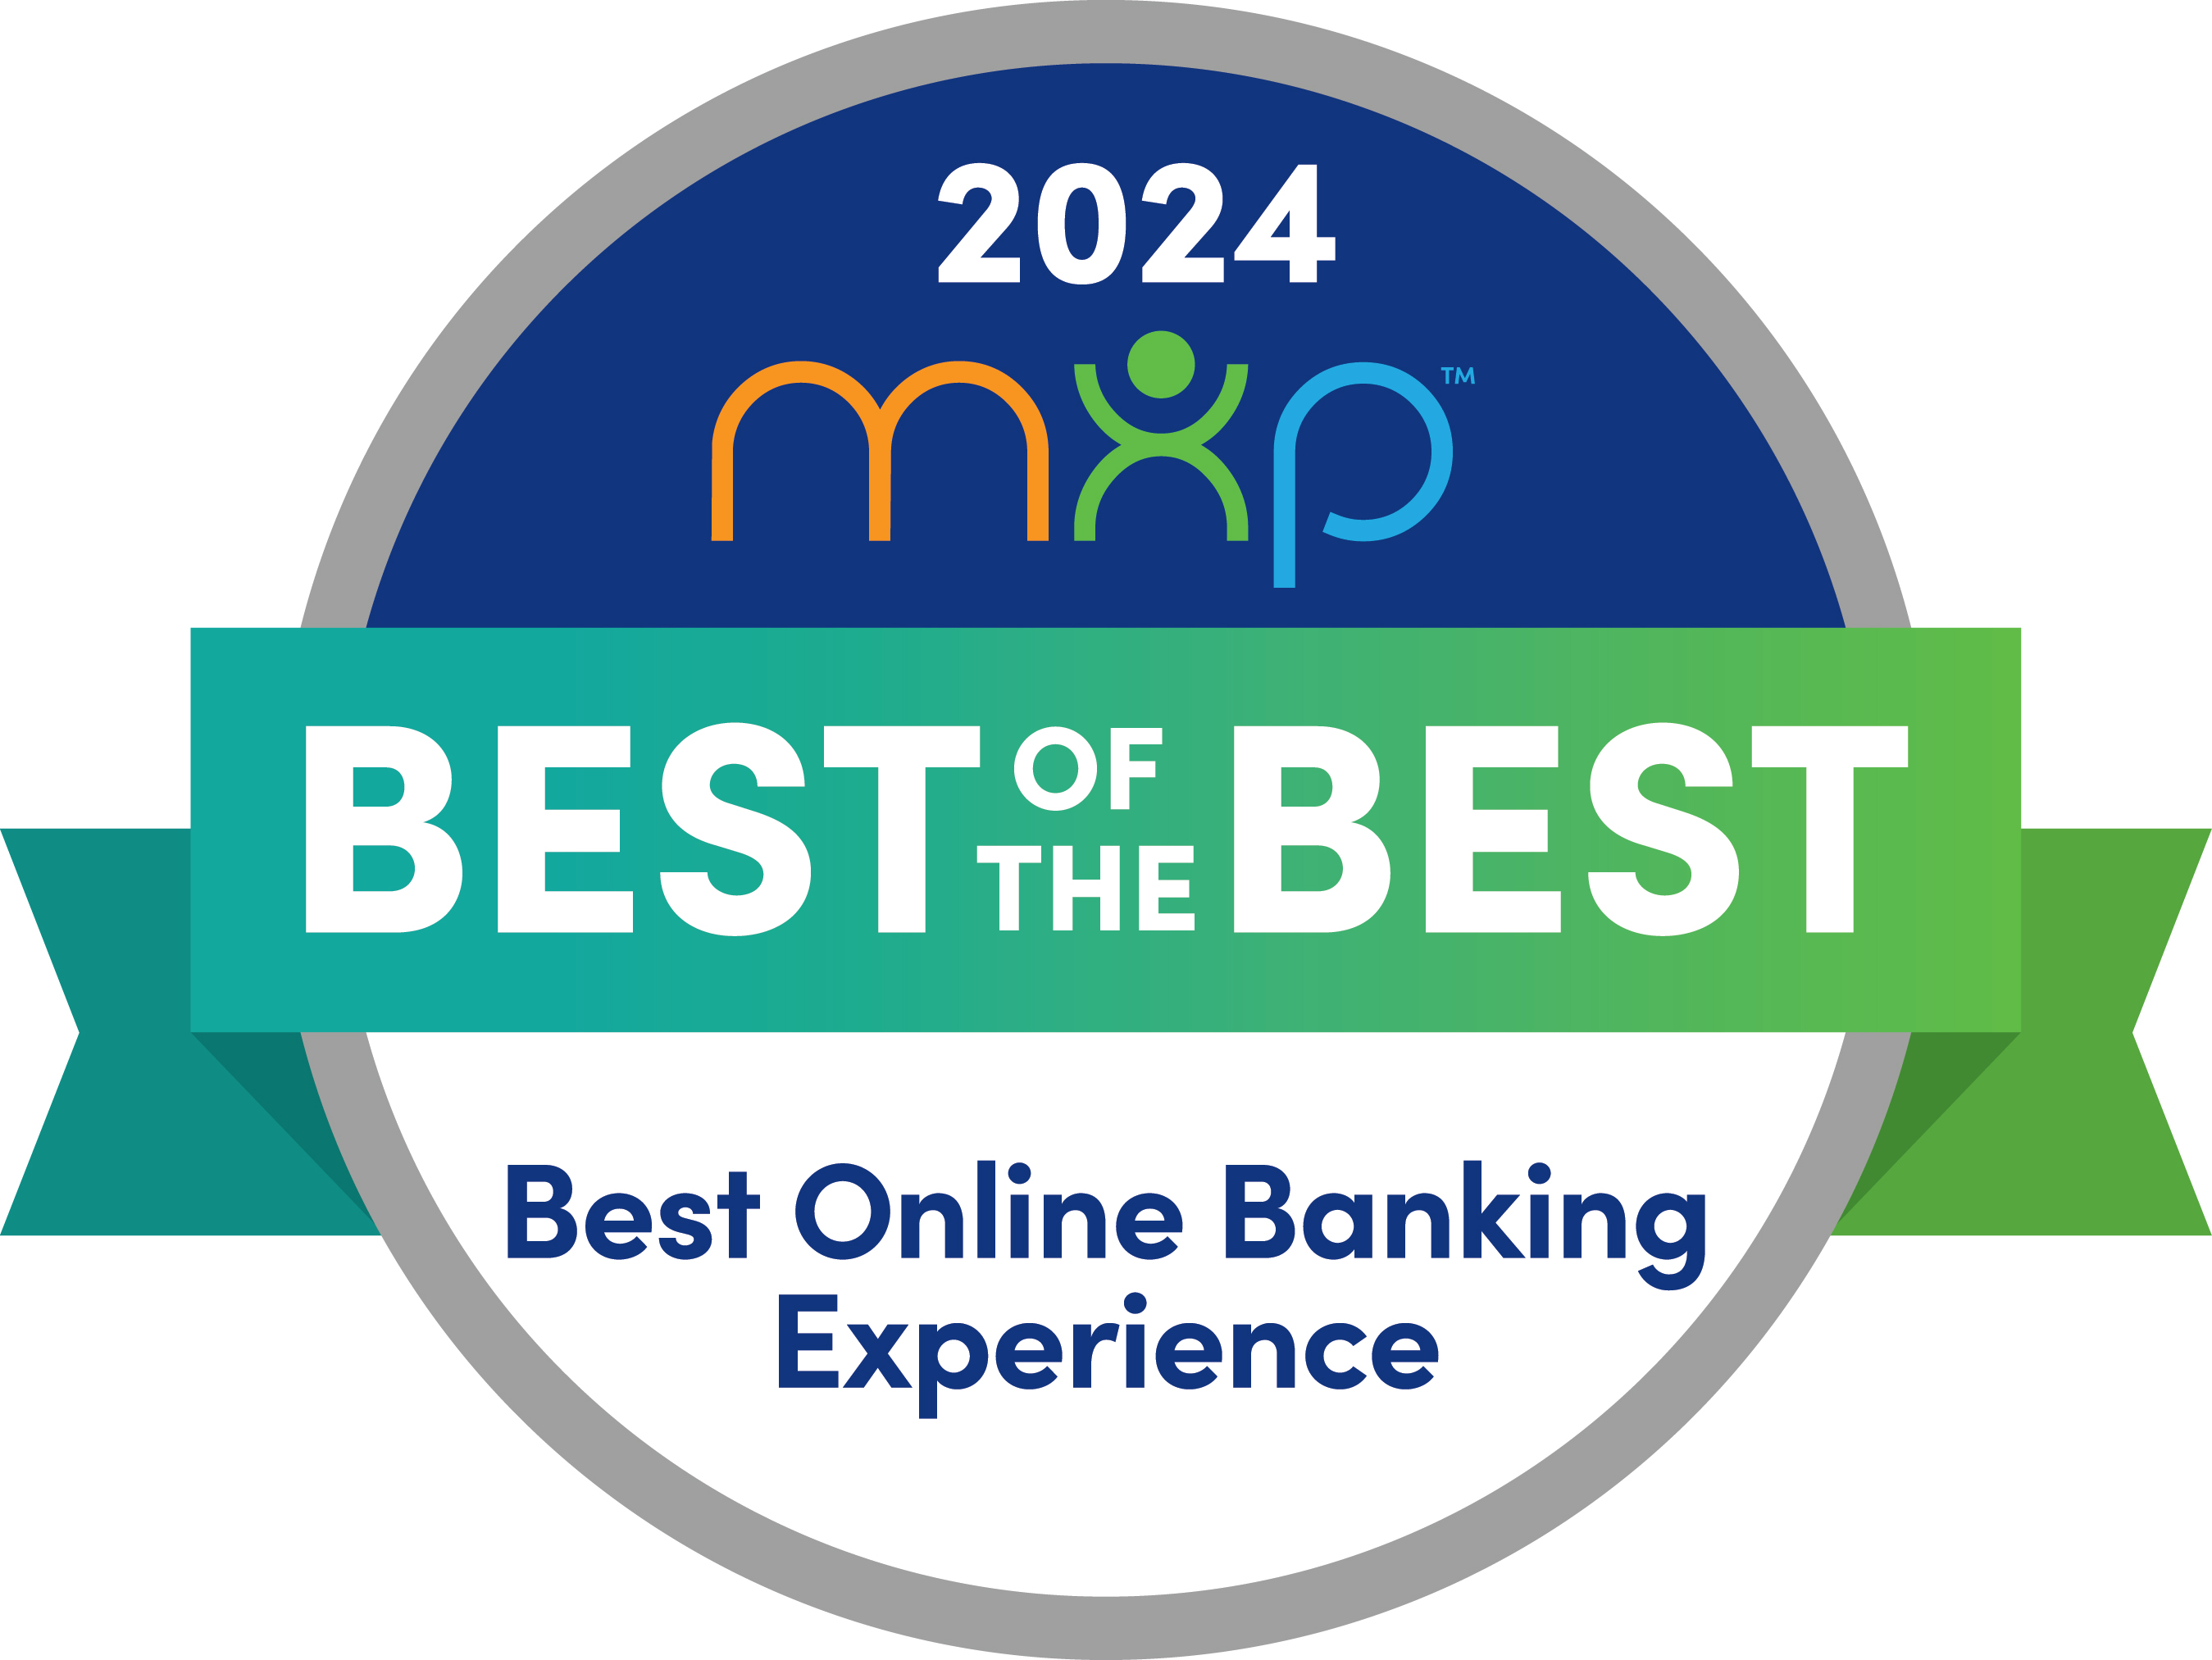 Best of the Best Online Banking Experience